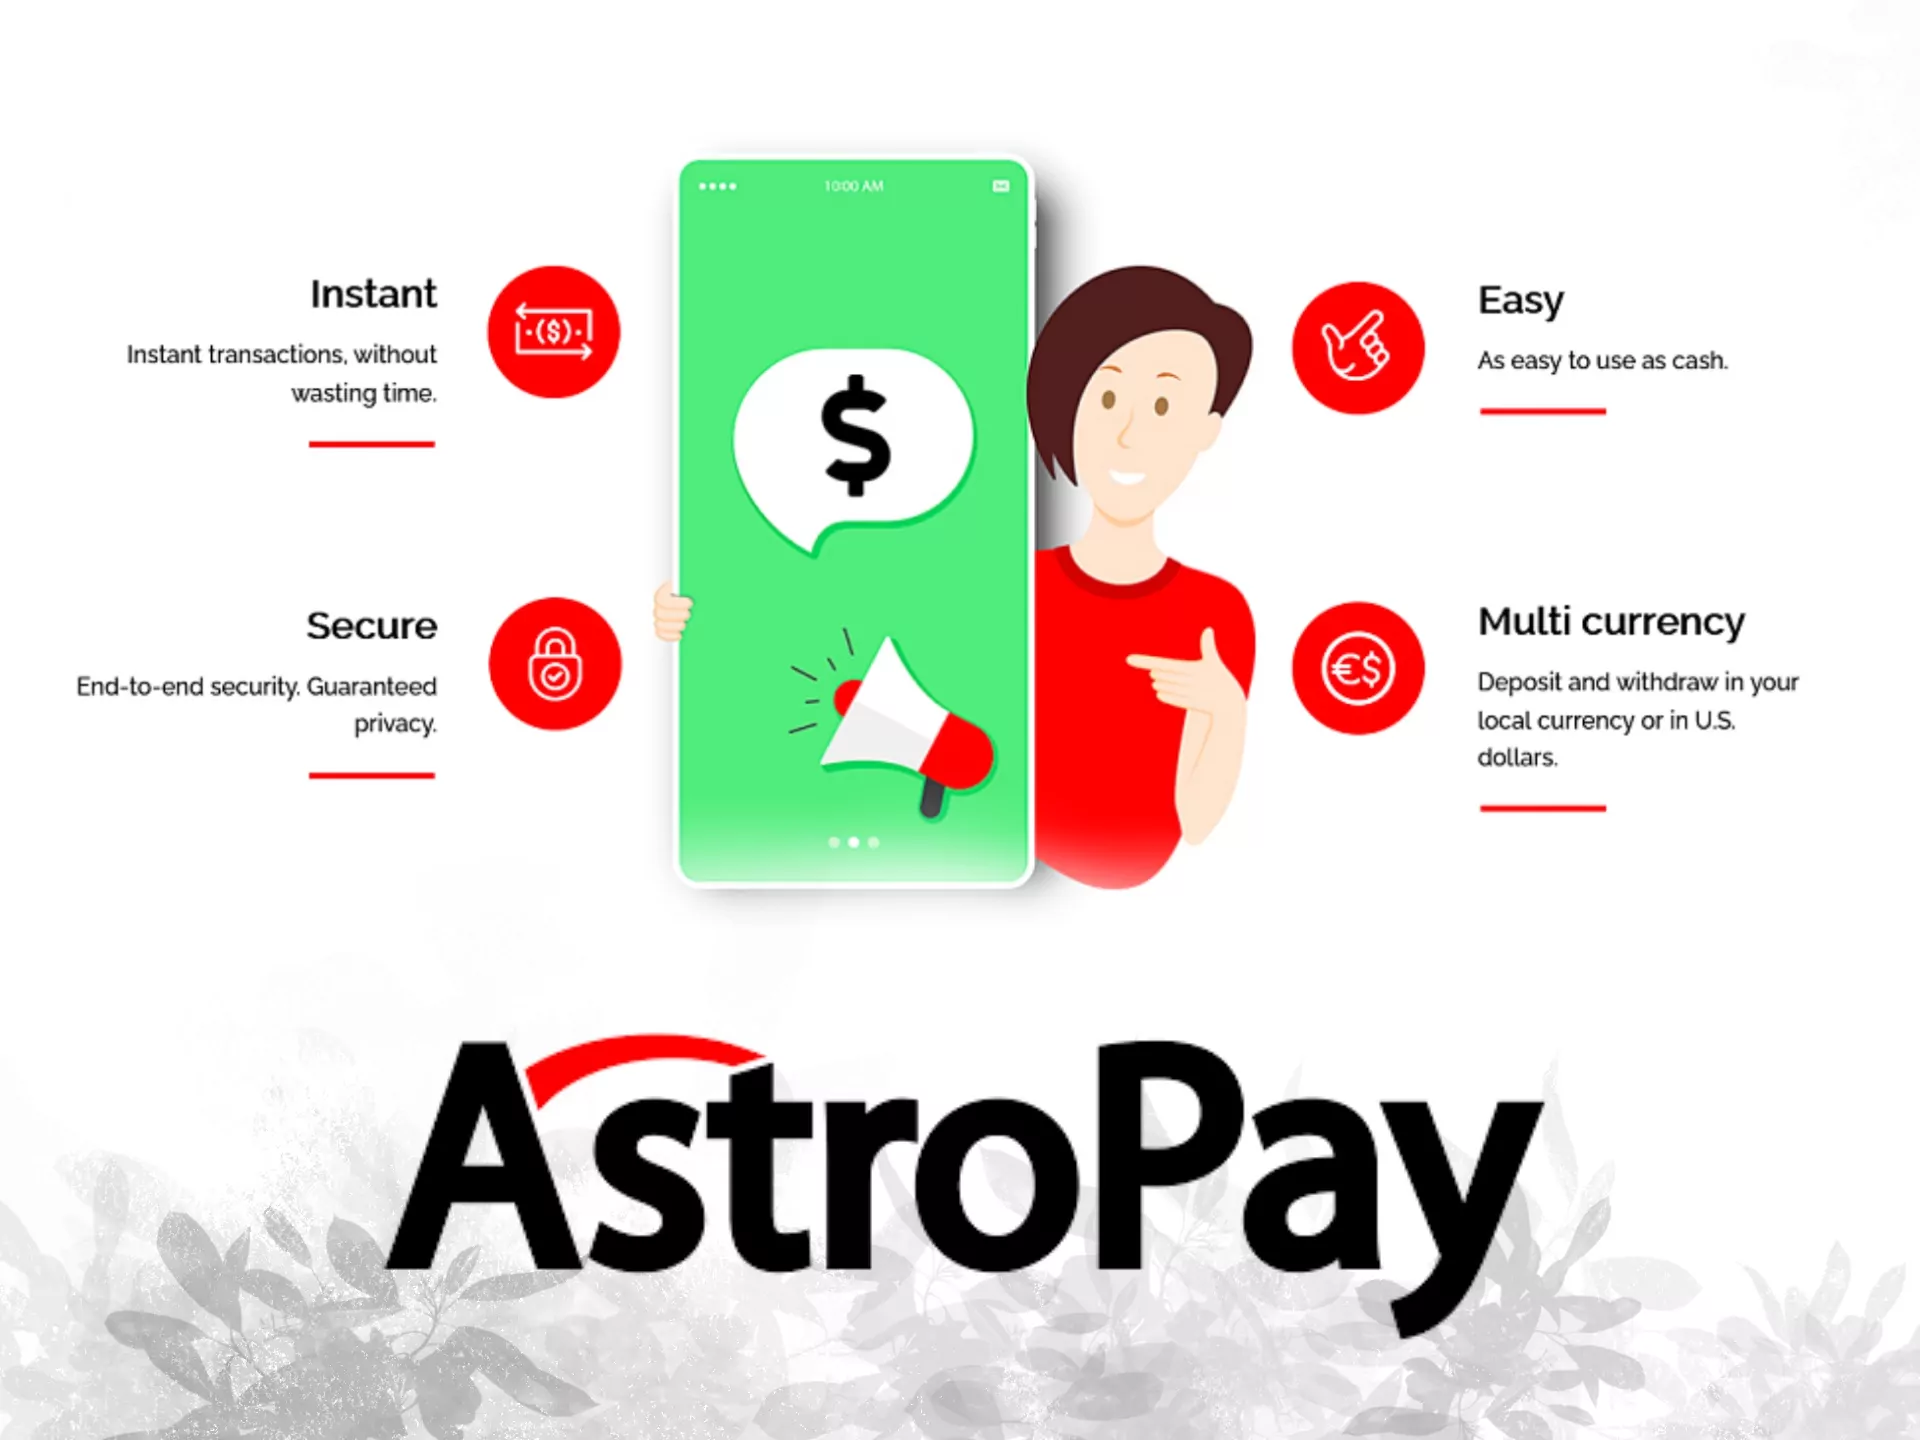 Astropay has more advantages than disadvantages, so you can trust Astropay your personal info and money.